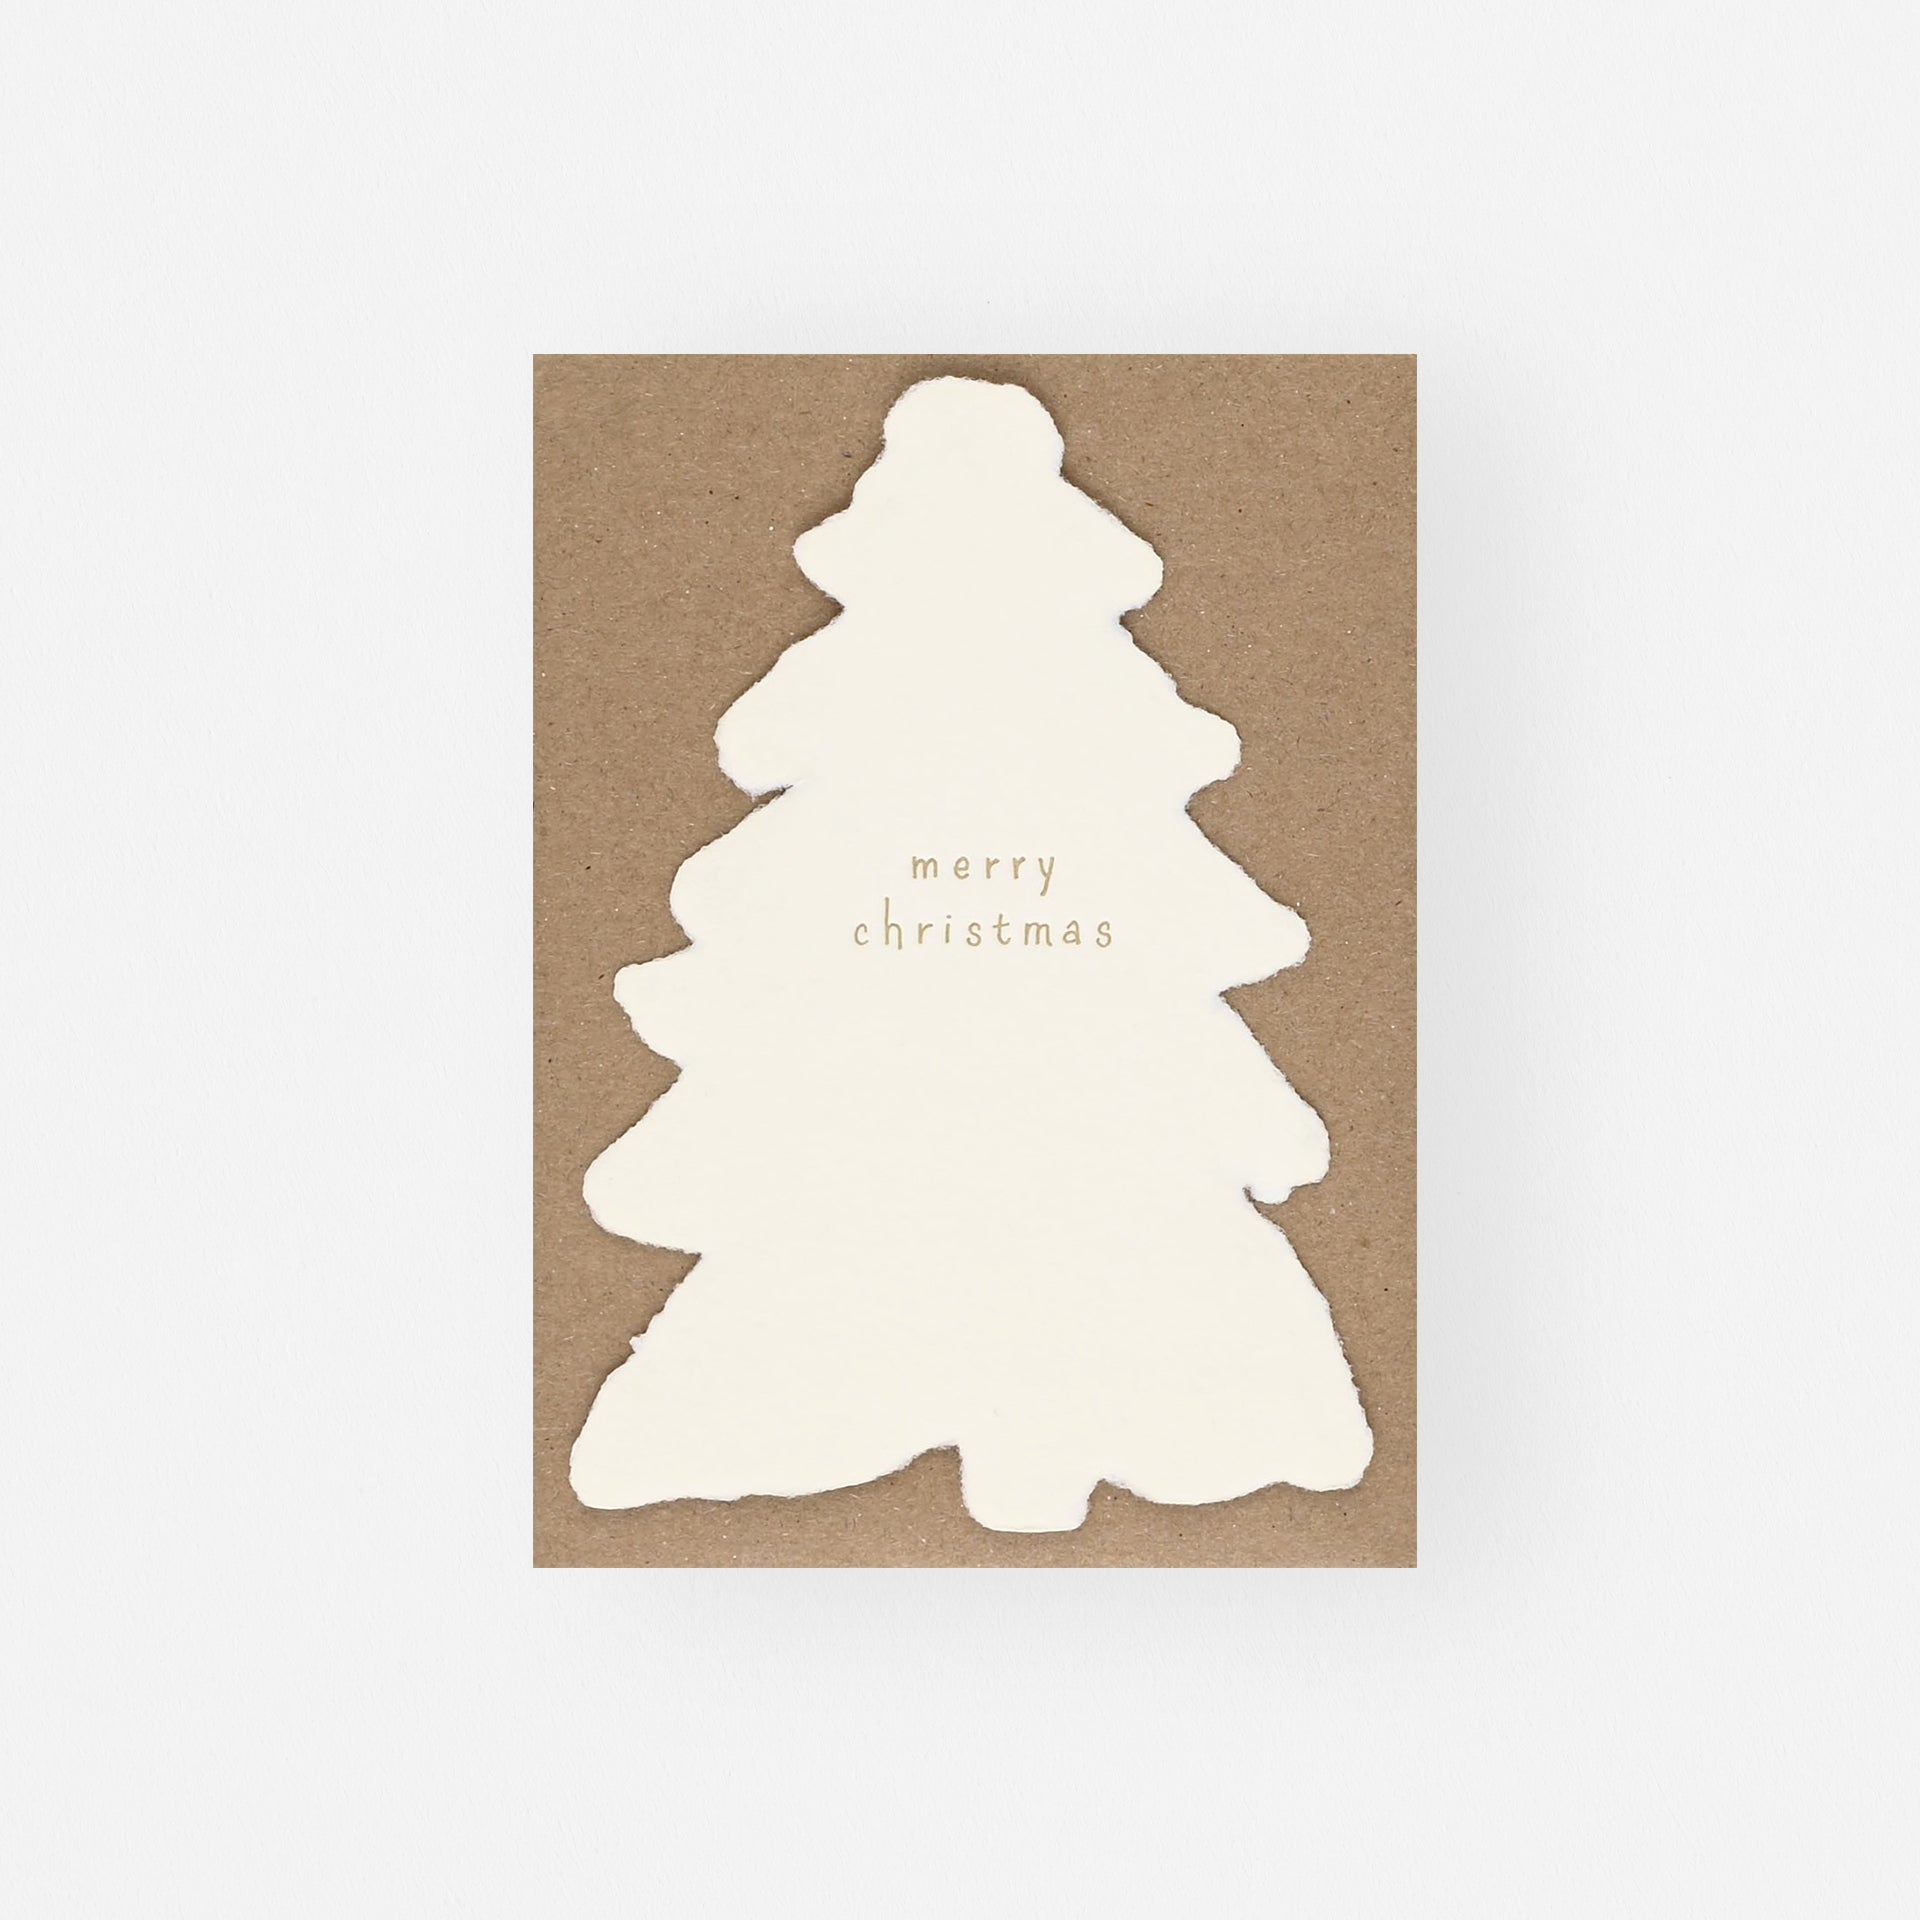 Oblation Papers & Press Merry Christmas Handmade Paper Tree Holiday Card 